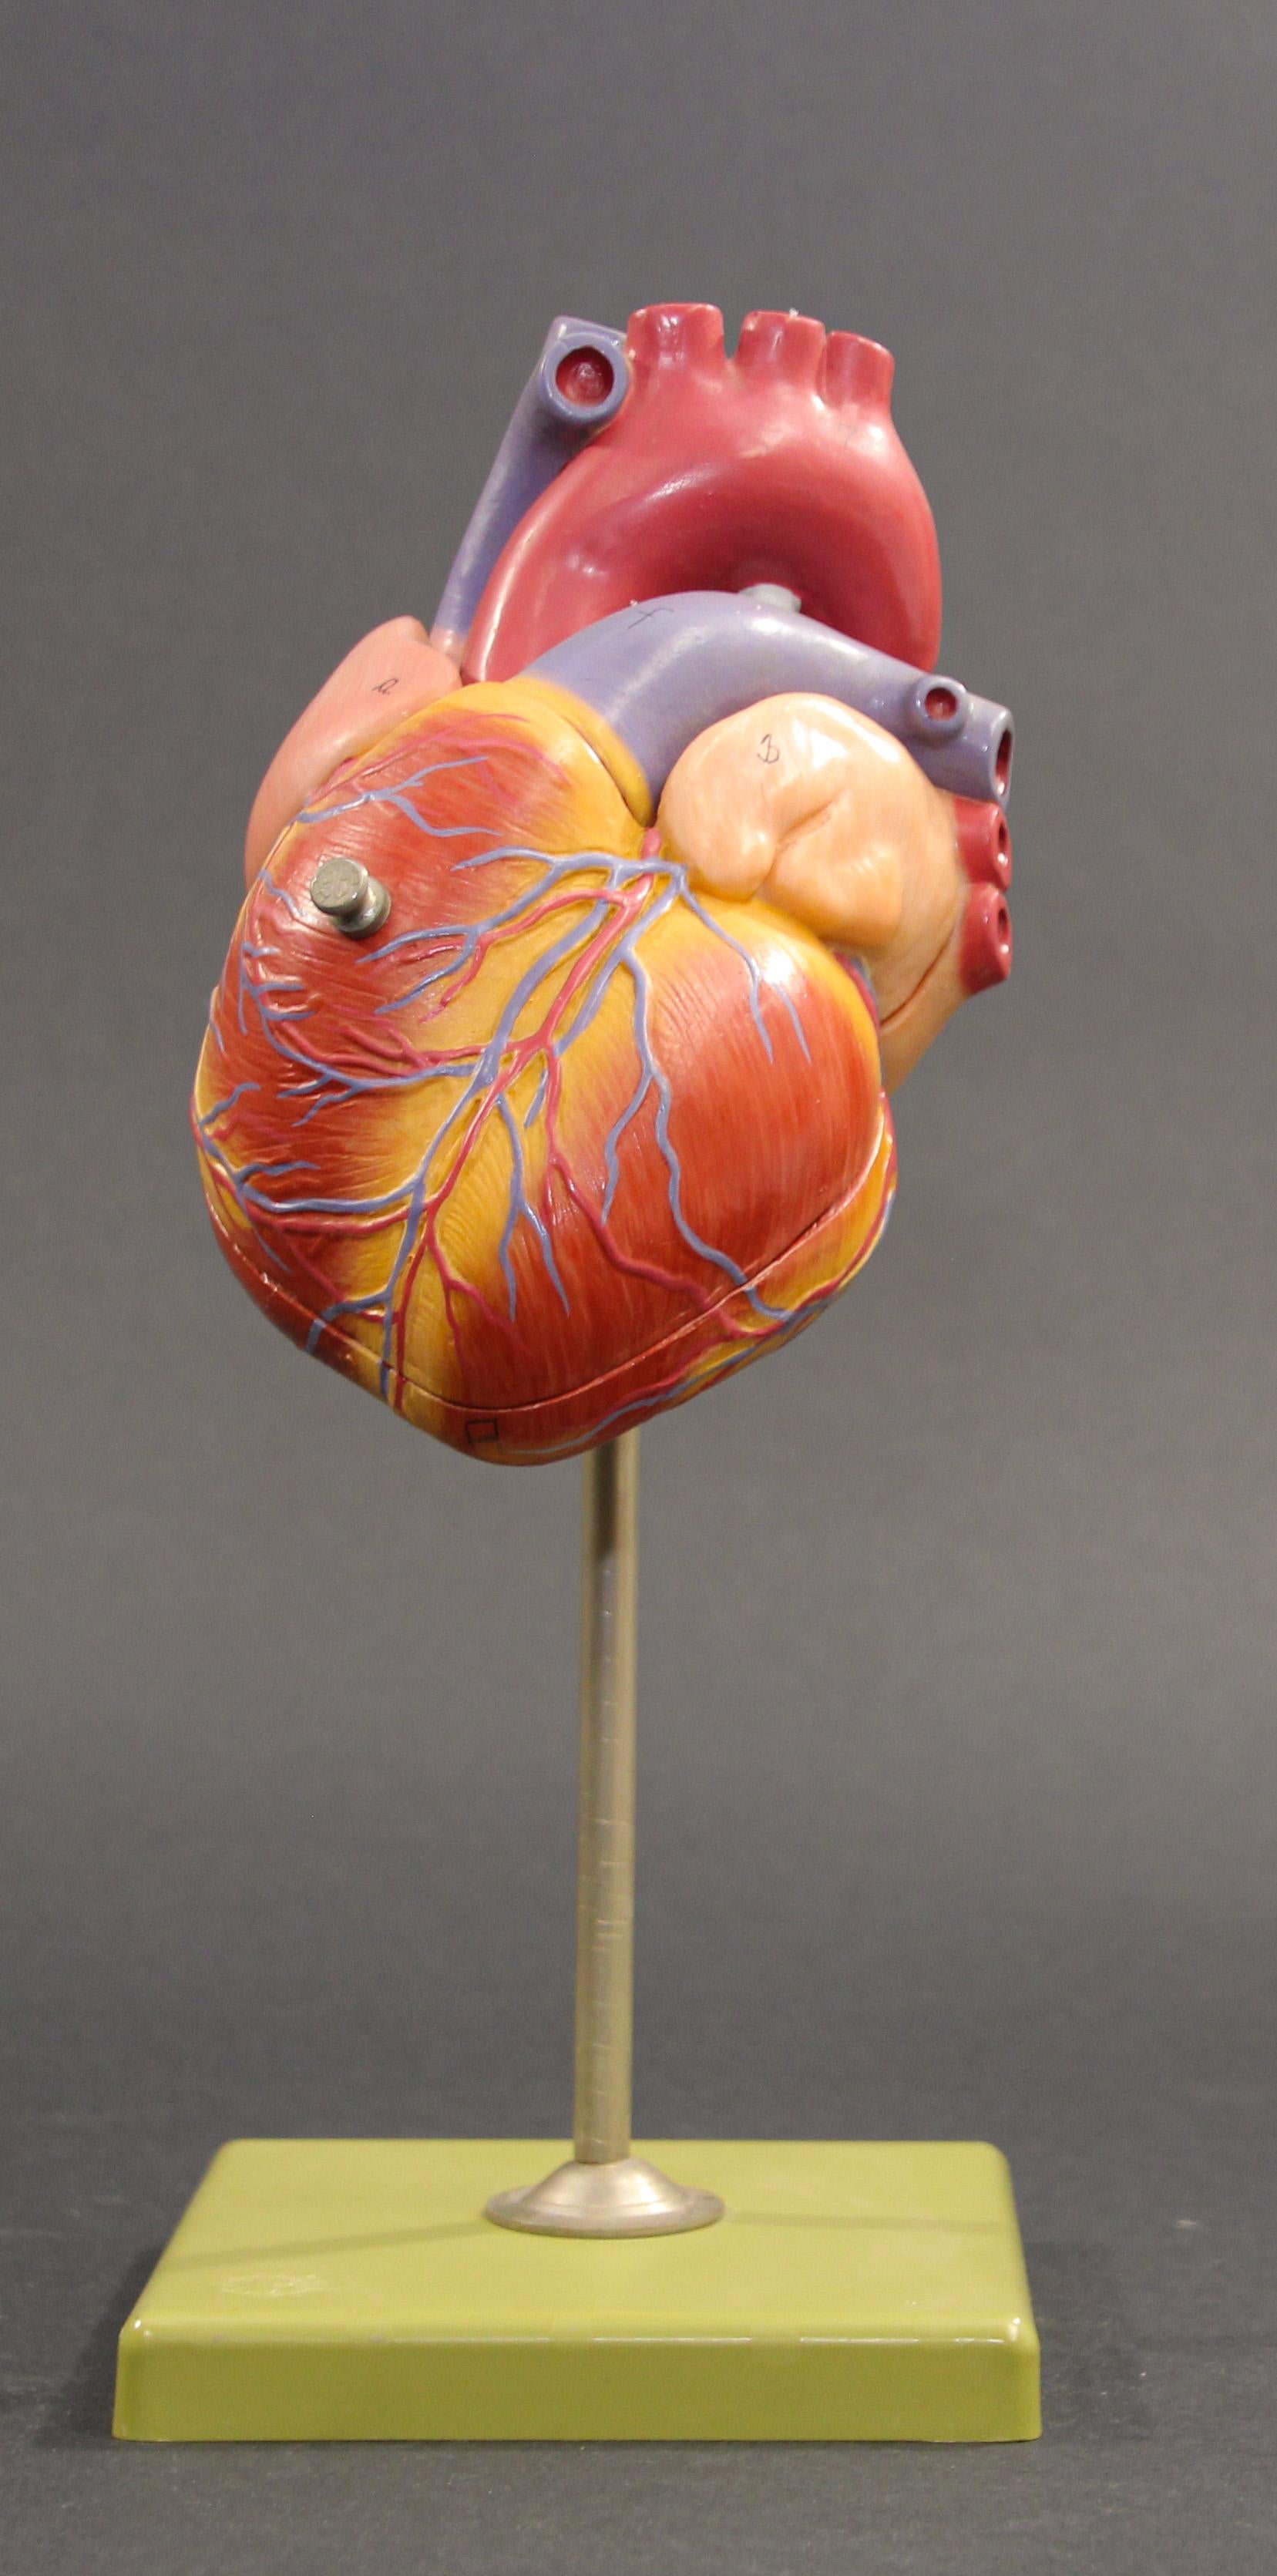 Vintage anatomical human heart model medical teaching tool on stand.
Anatomic model for teaching, depicting a human heart, made out of plastic resin hand painted, mounted over a green square base.
Scientific heart and diaphragm model, comes in 2